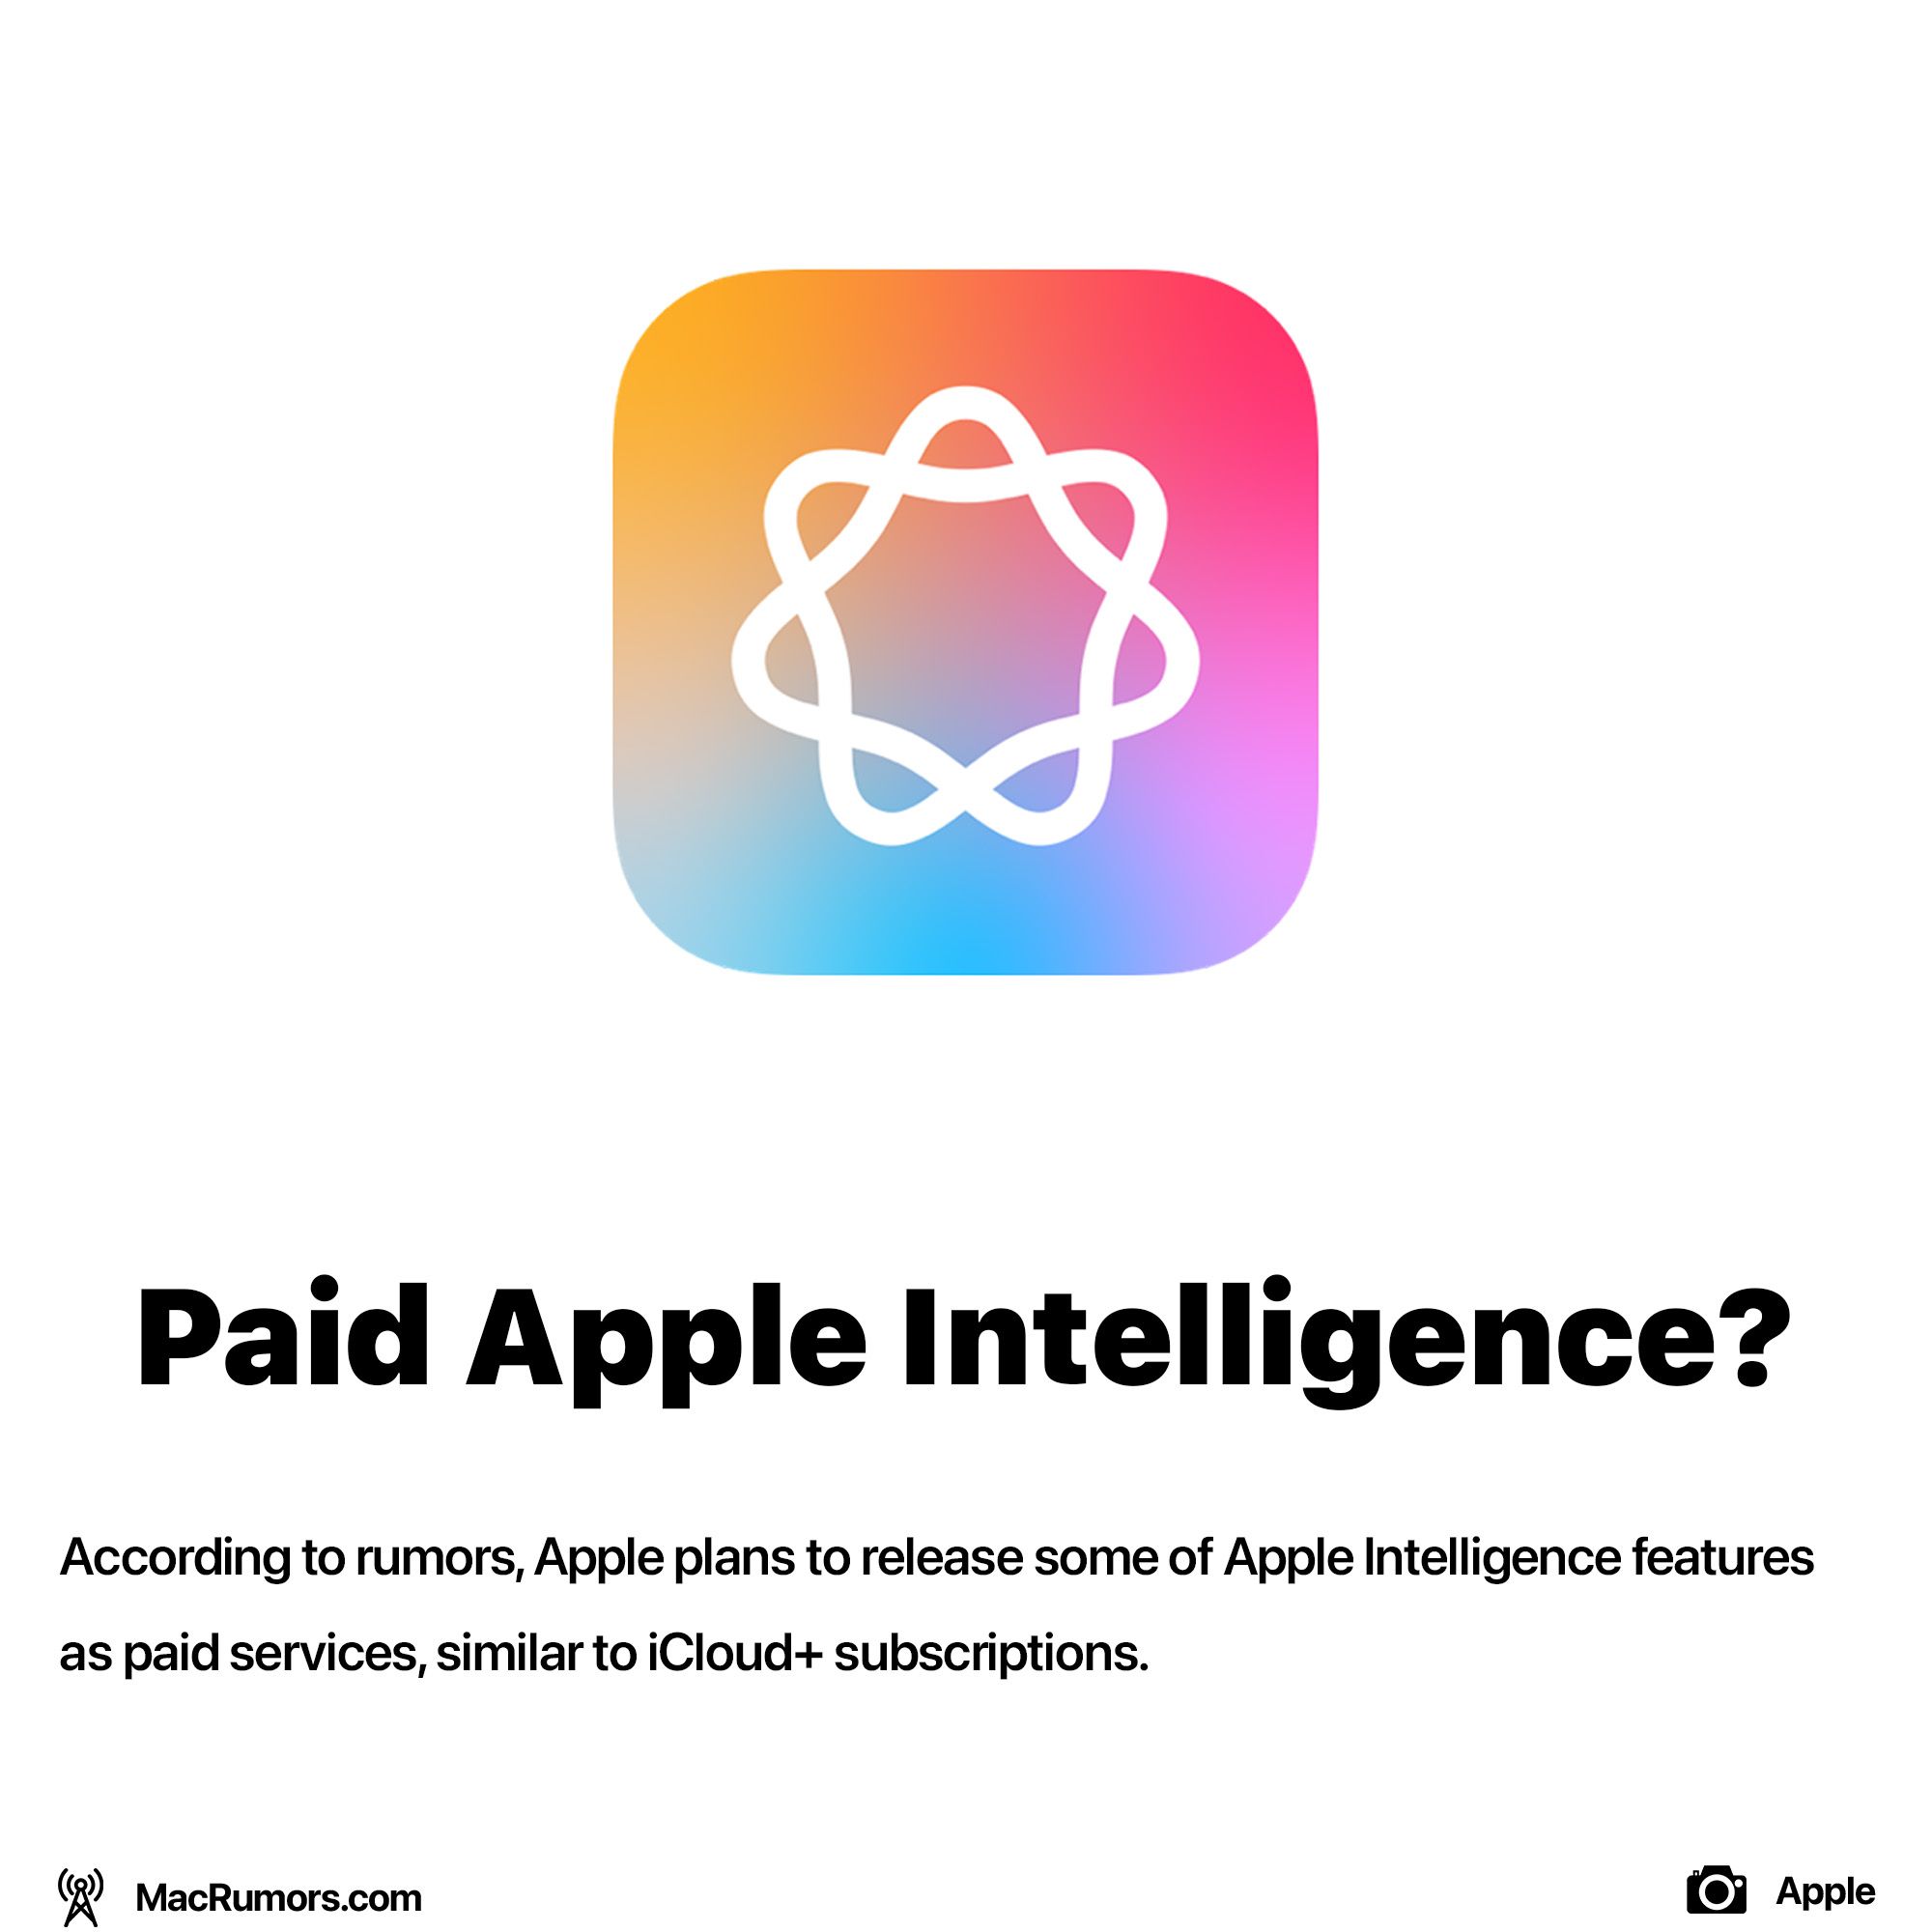 Apple plans a paid subscription for some Apple Intelligence features